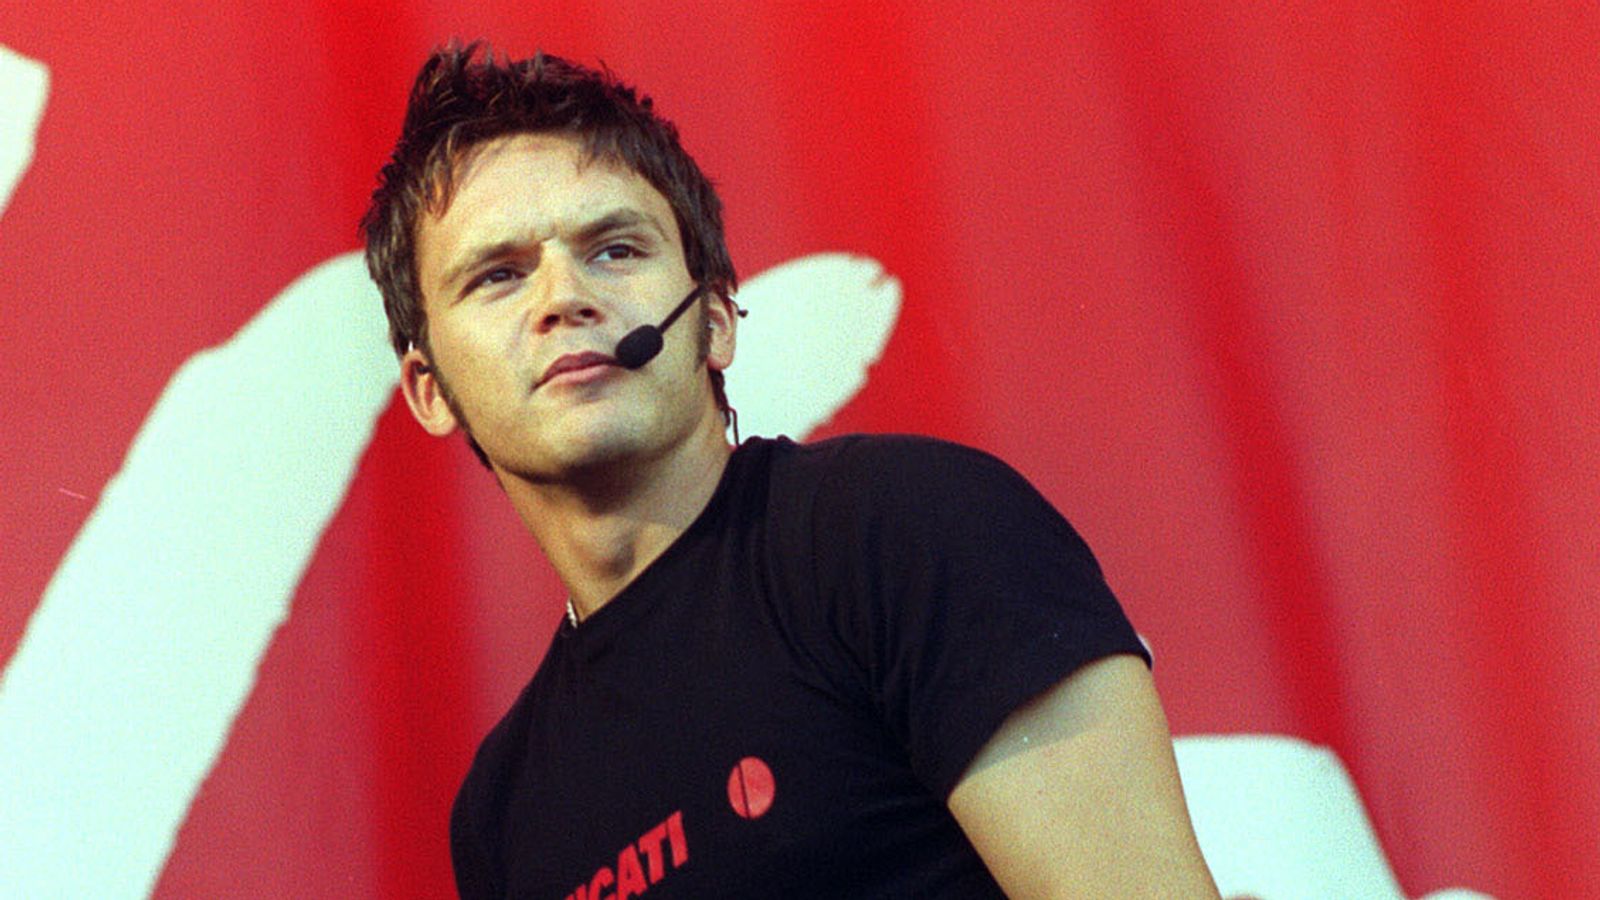 Paul Cattermole: S Club 7 singer died from natural causes, coroner says